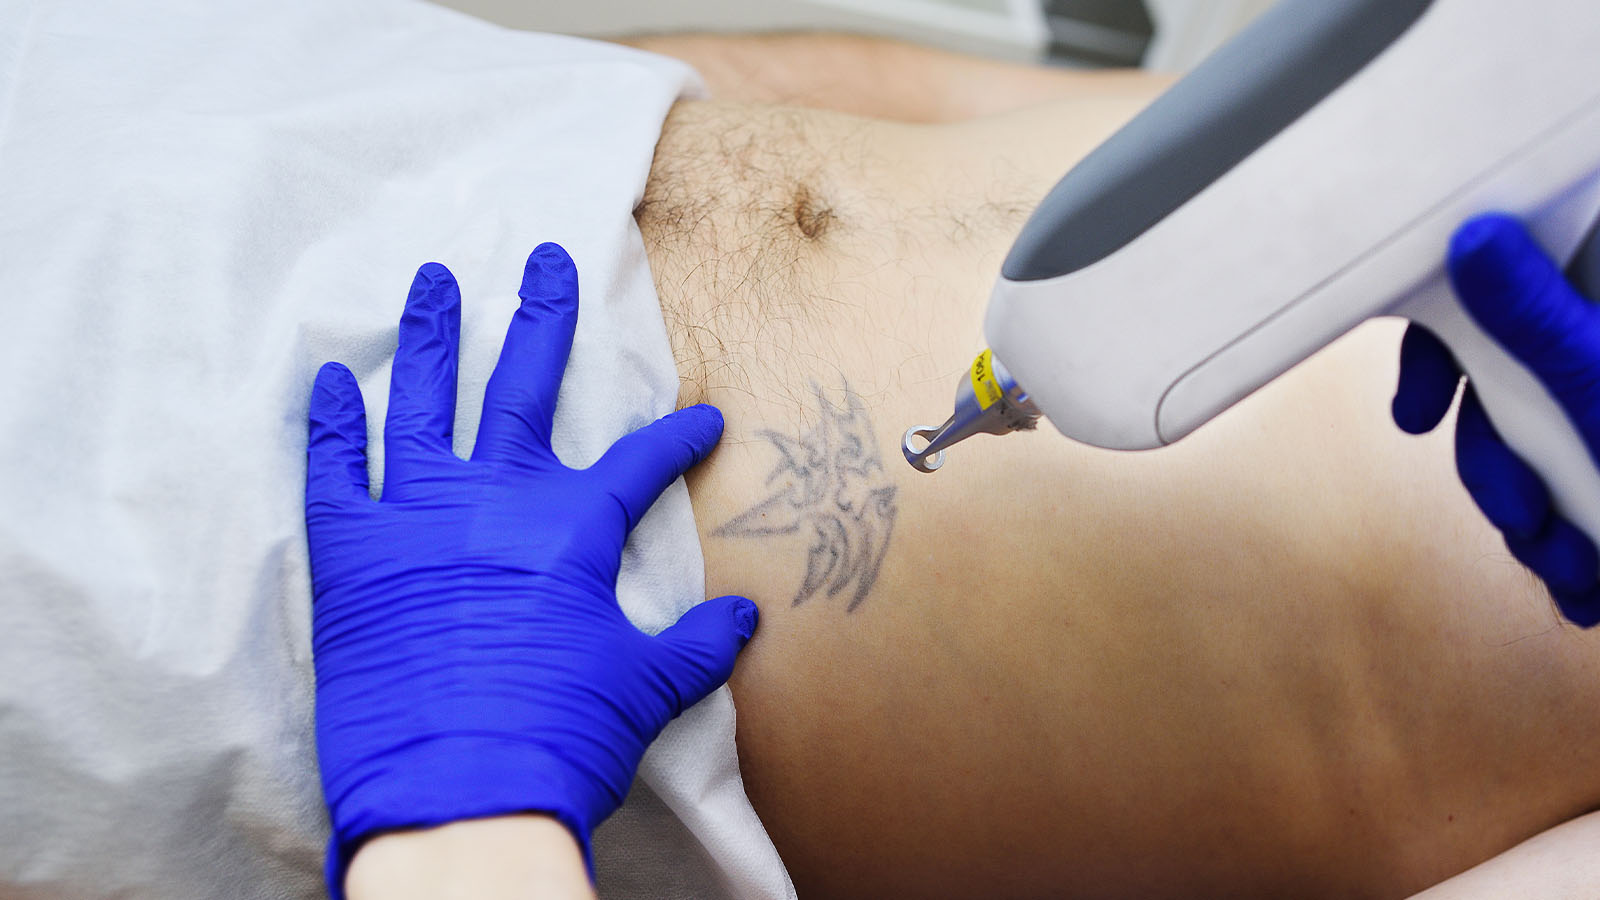 Removing Tattoos with the Picosecond Laser at Bodyland Rotterdam